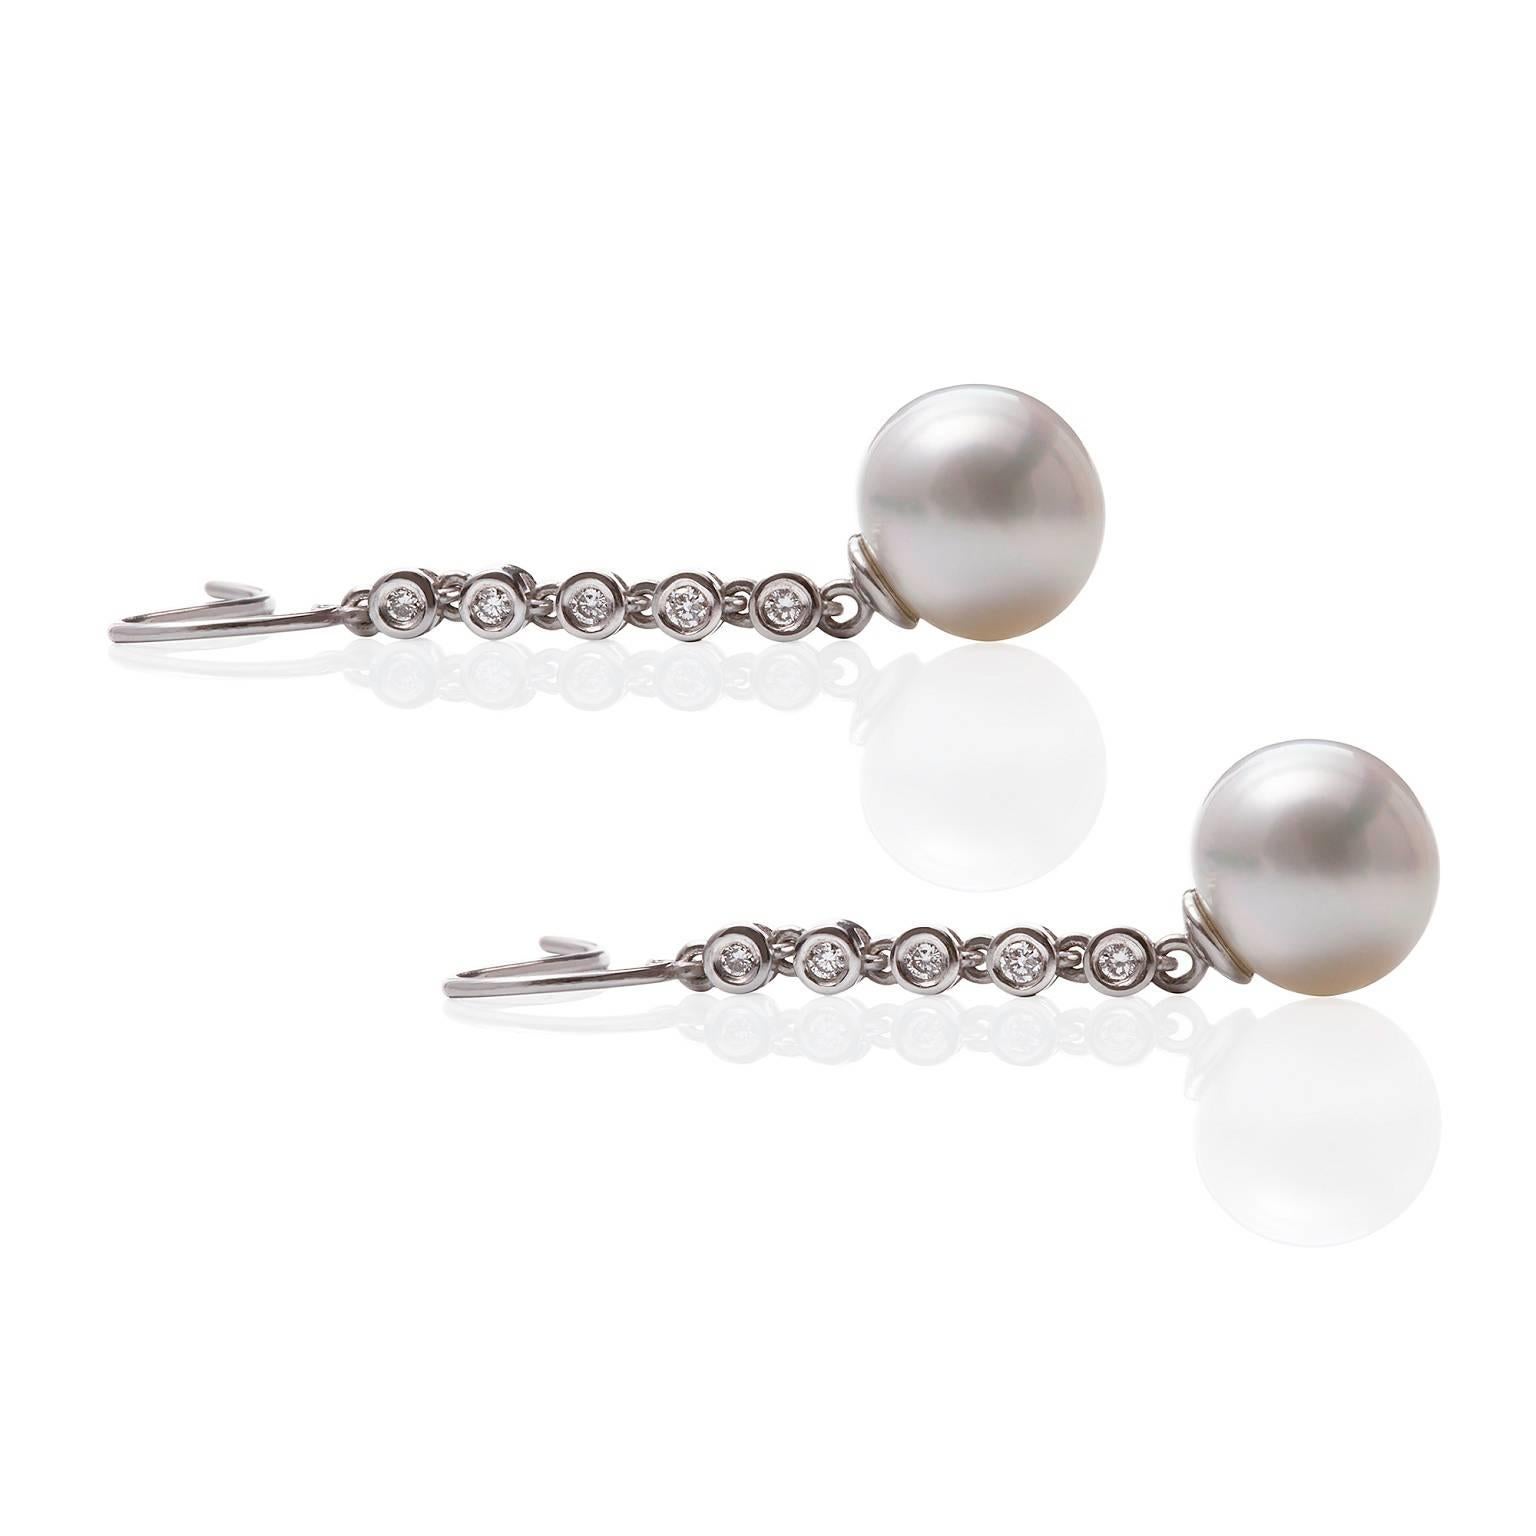 Perla Cascade Earrings

This elegant earring has been sold however we are able to remake it with the metal or Pearls of your choice in 20 working days. Please contact us for more information.

Timeless elegance. These beautiful drop style earrings